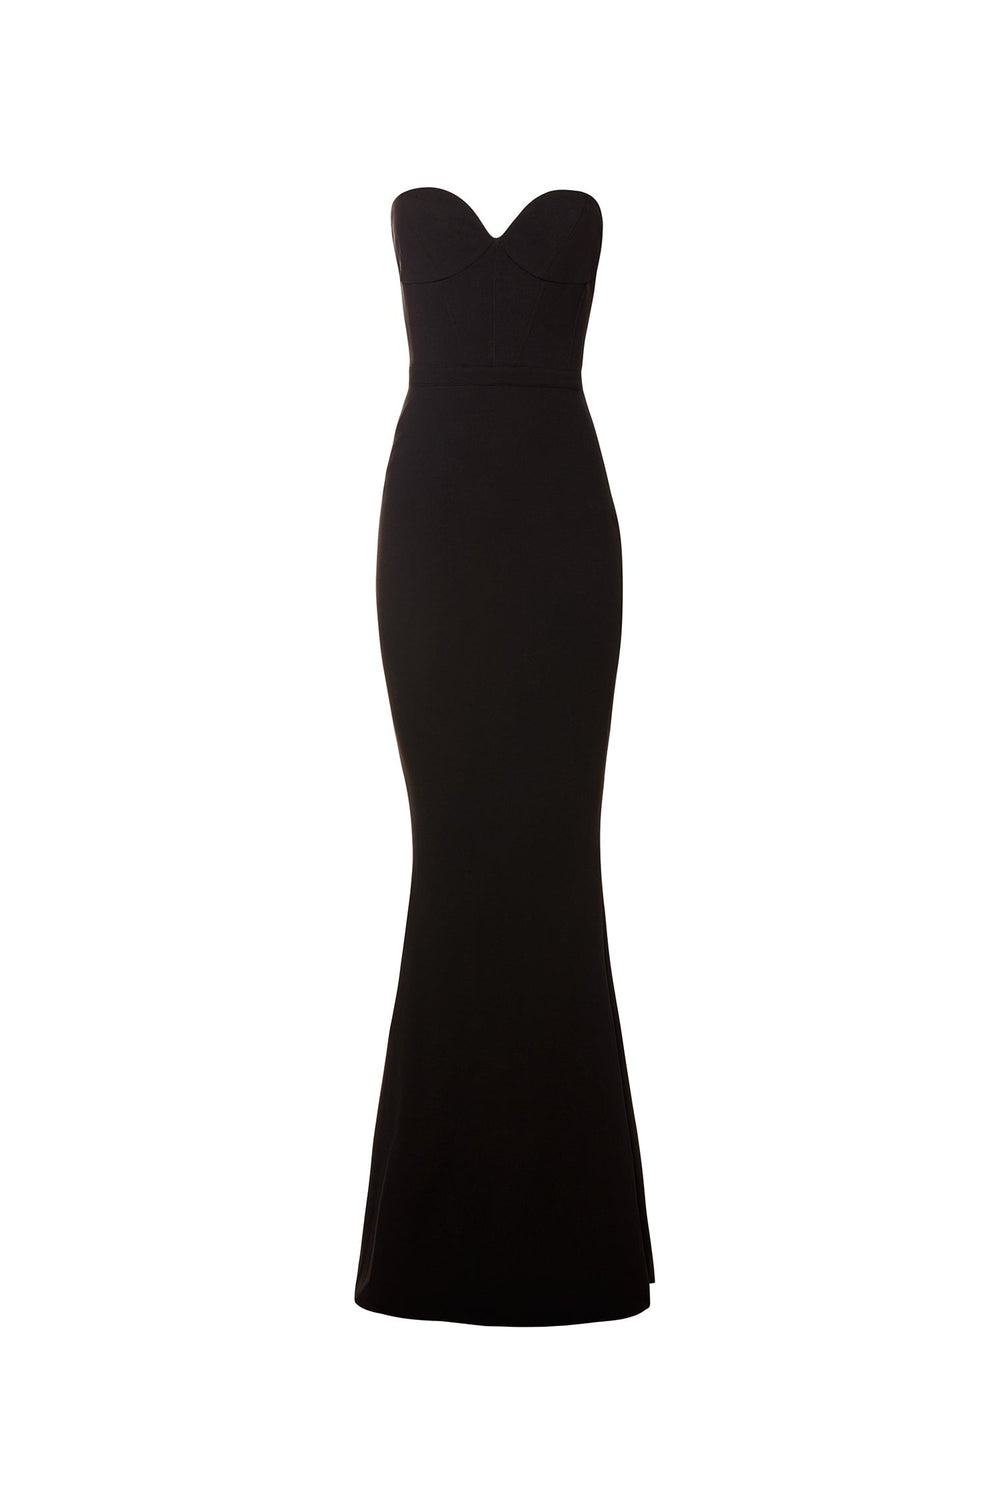 Faye - Black Strapless Crepe Gown